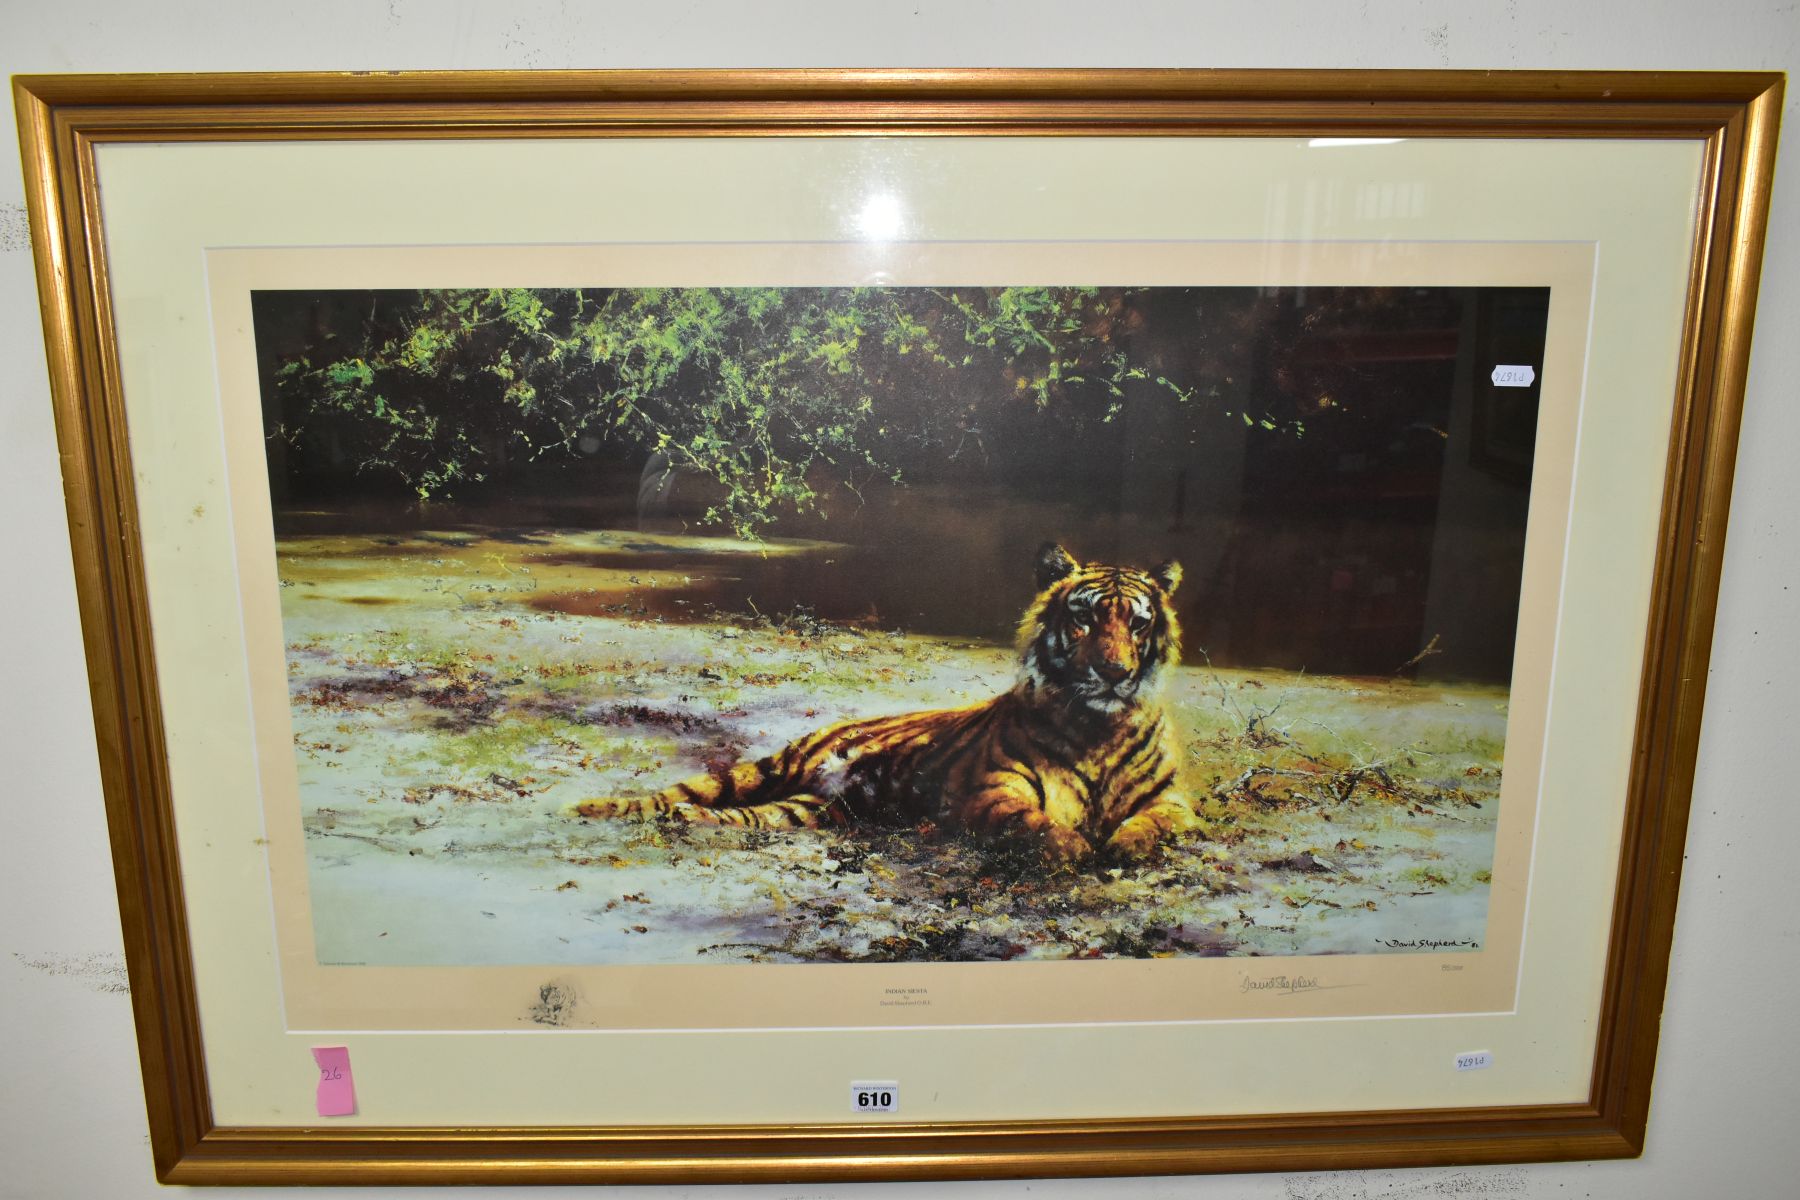 DAVID SHEPHERD (BRITISH 1930-2017) 'Indian Siesta', a signed Limited Edition print of a Tiger